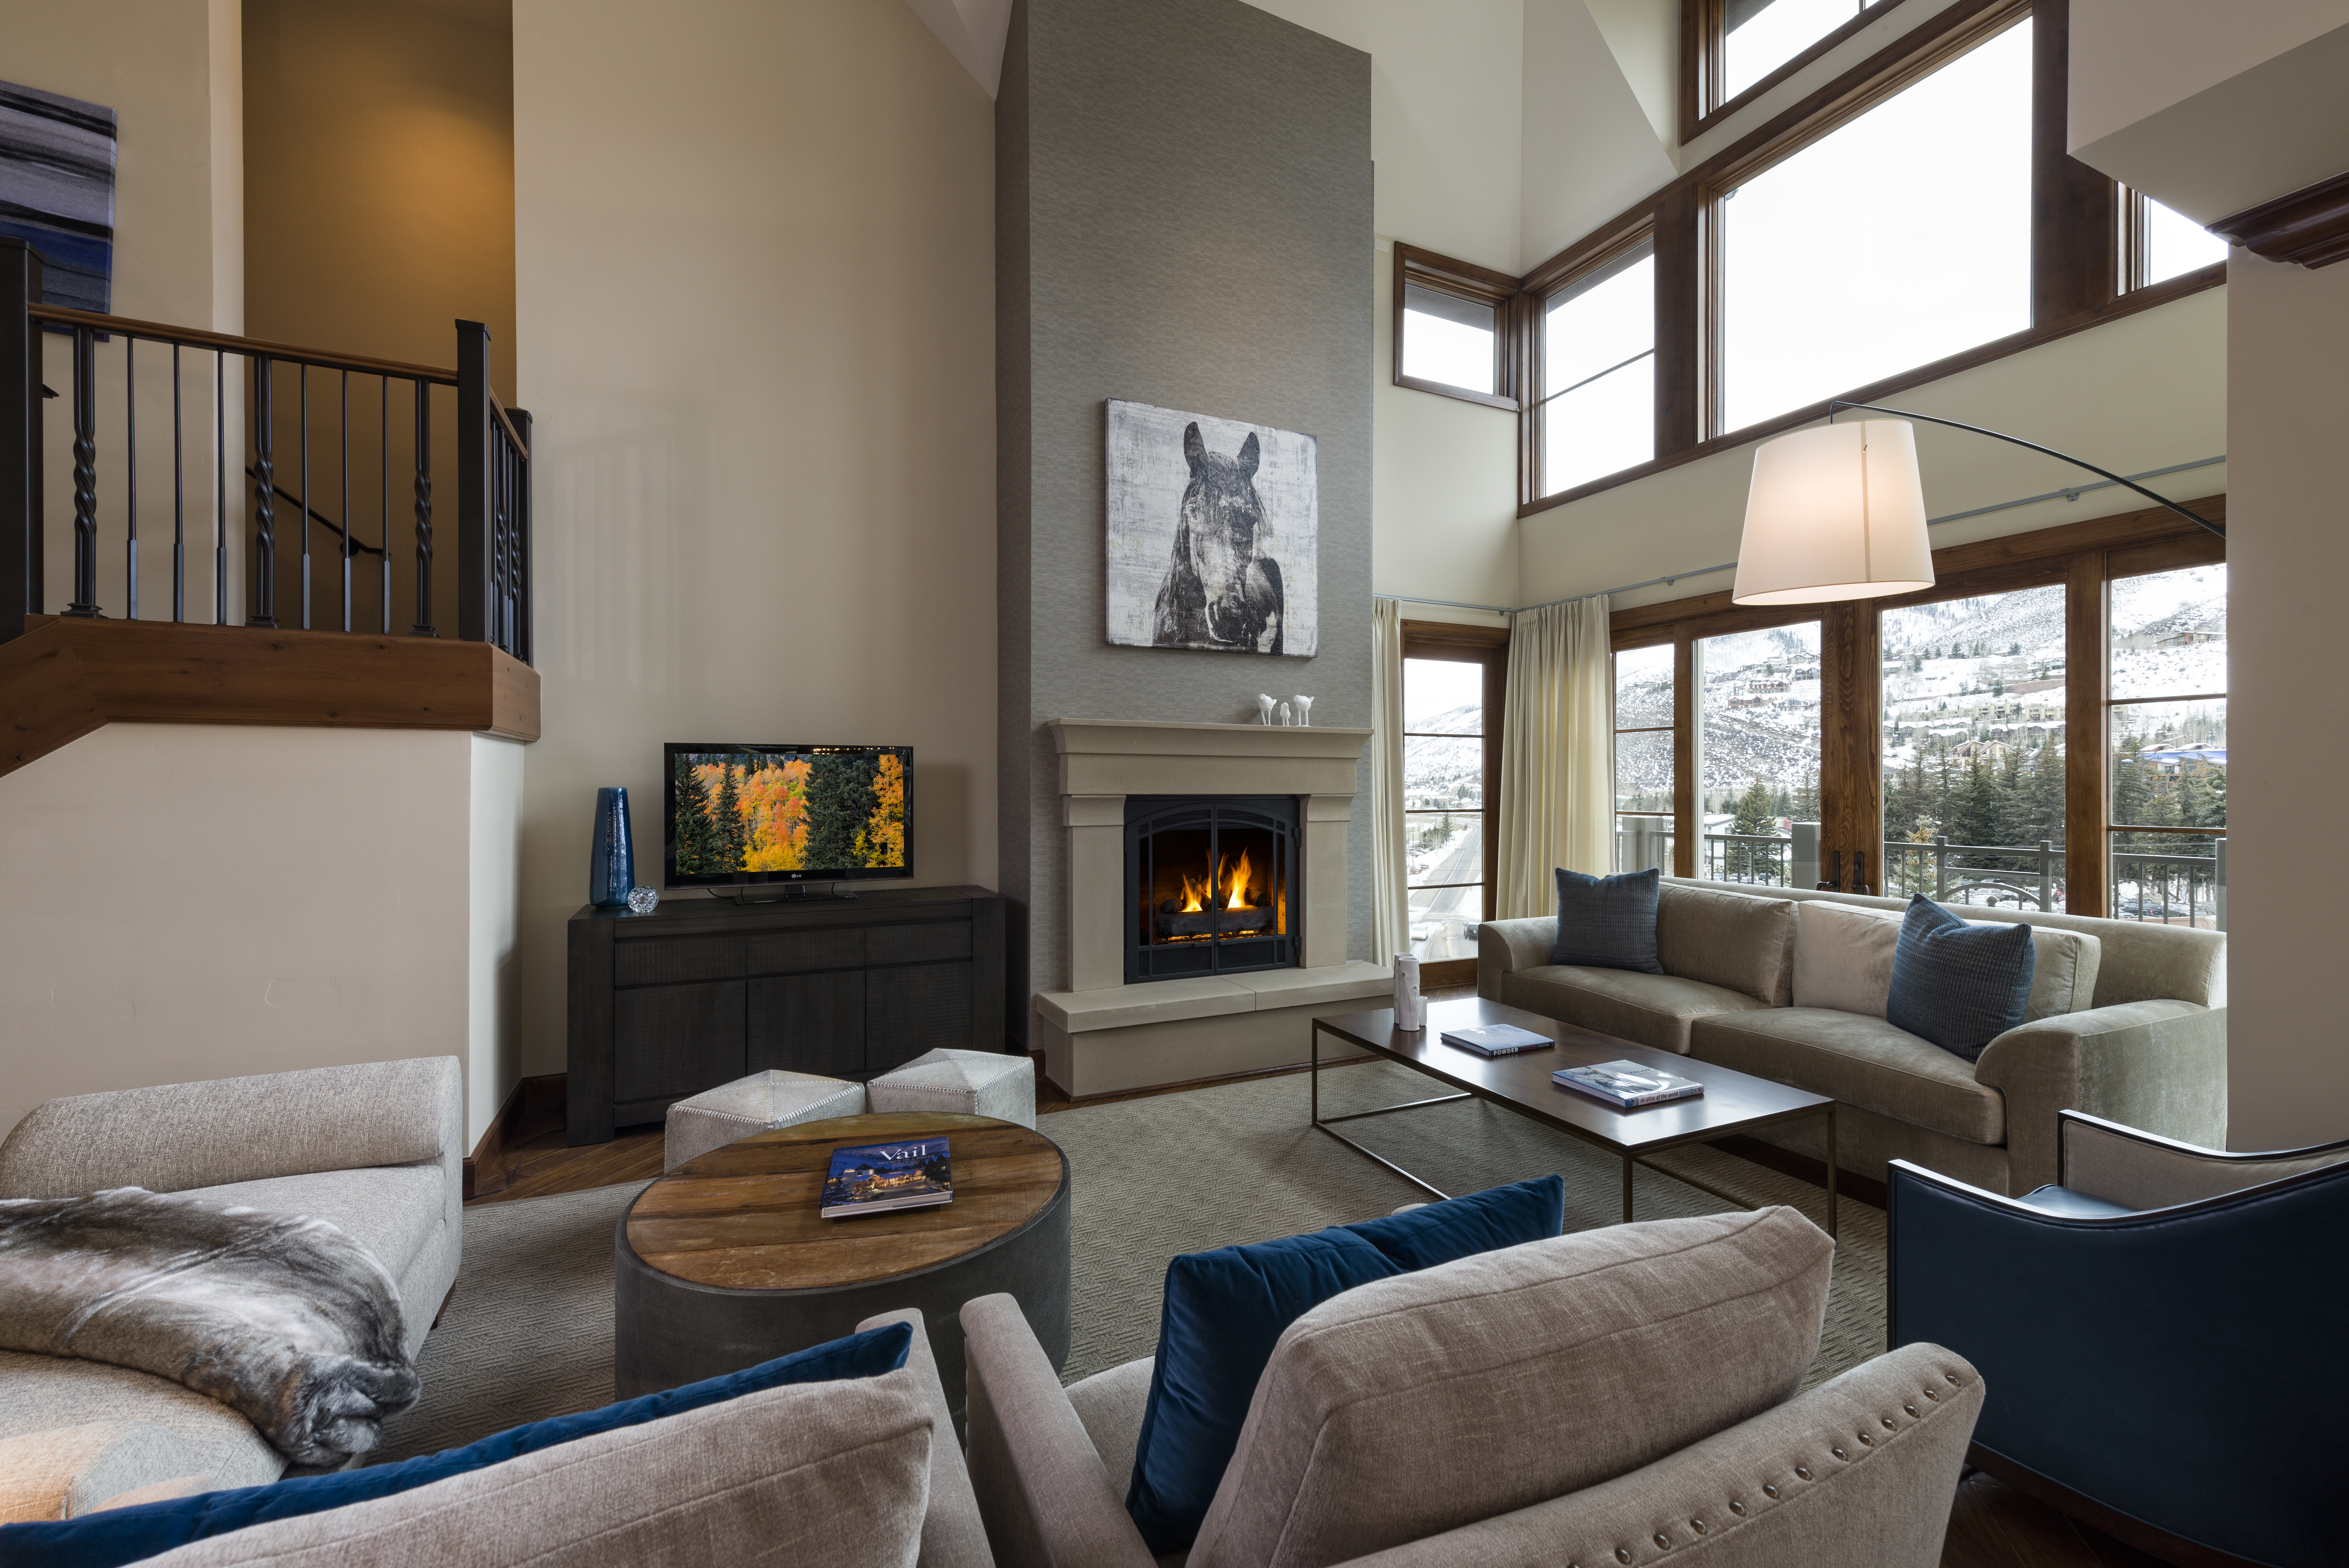 Pictured: Exterior and Residences 101 and 402 of The Ritz-Carlton Residences, Vail.